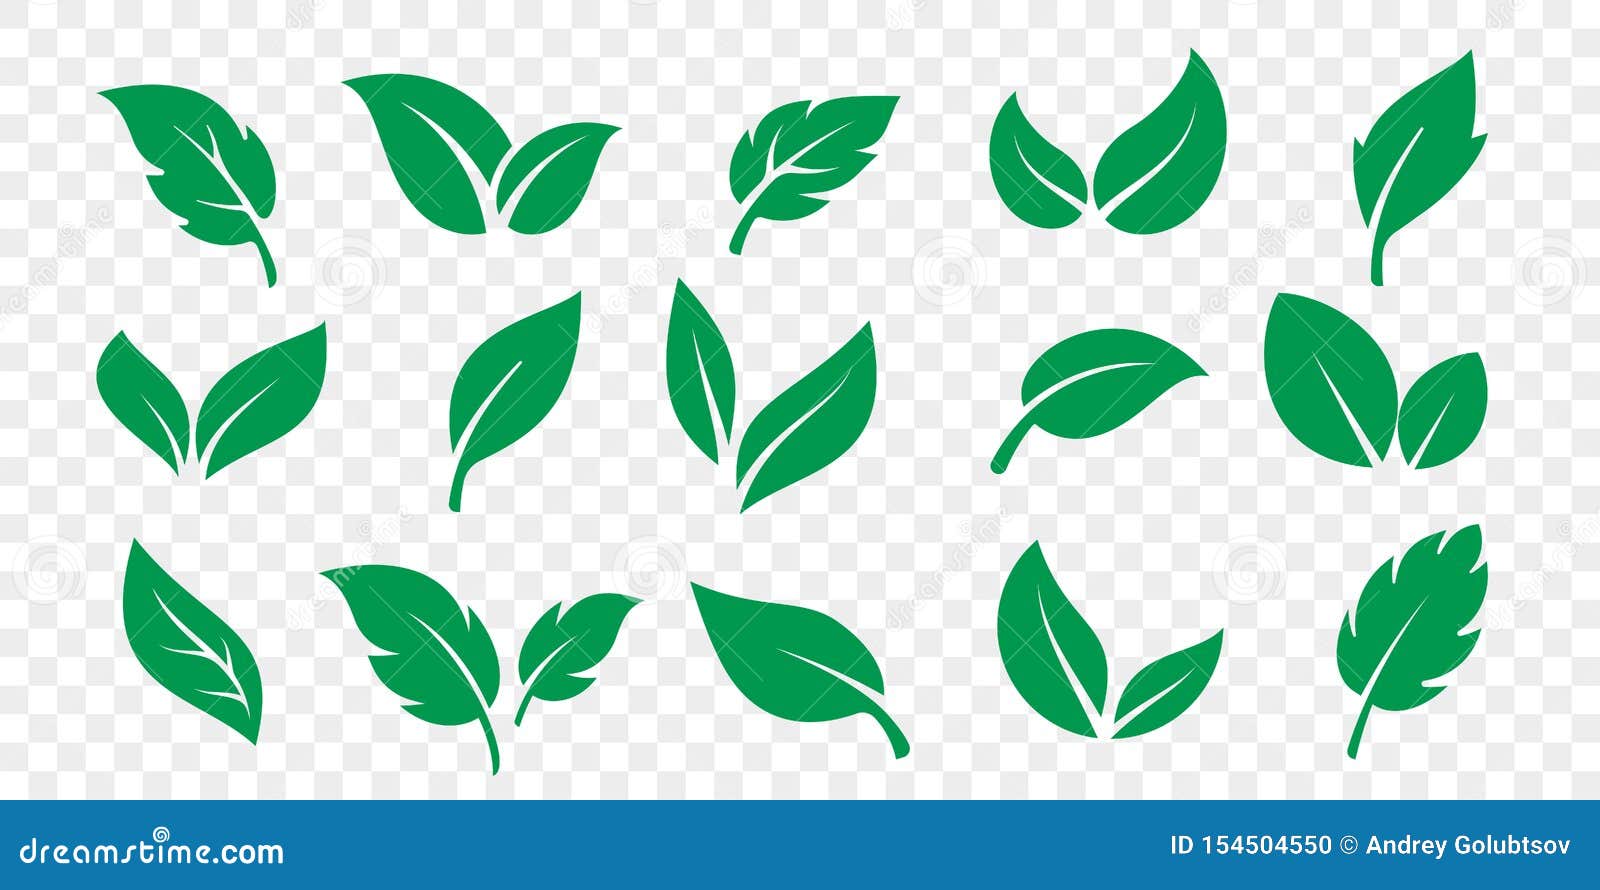 green leaf icons set on white background.  vegetarian, vegan, eco and organic herbal icons